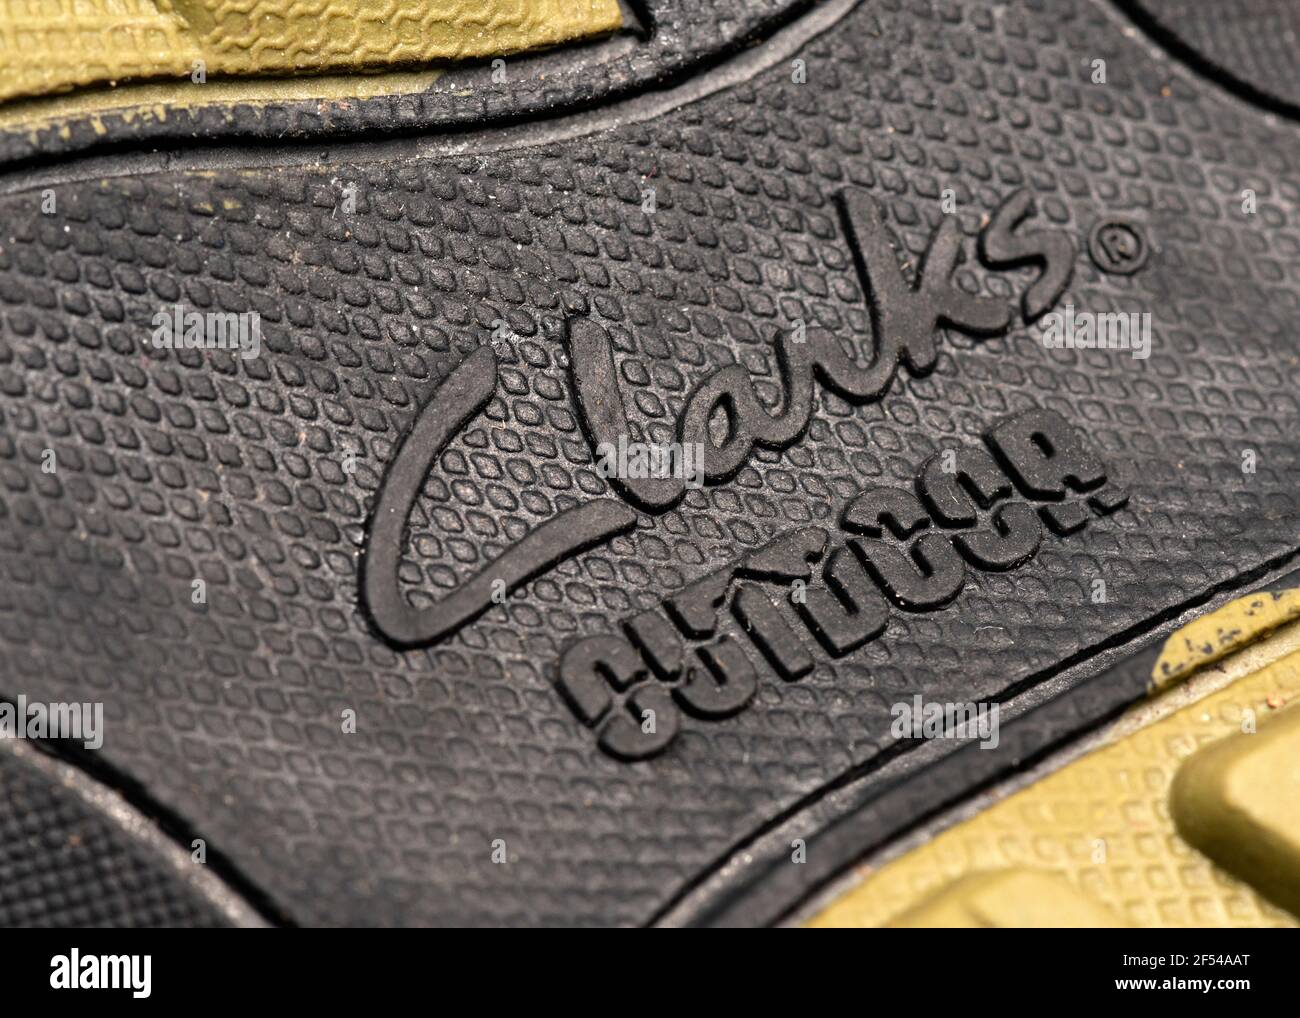 Clarks shoes. Clarks Outdoor outer sole of Gore-Tex waterproof men's hiking  boots close up detail Stock Photo - Alamy